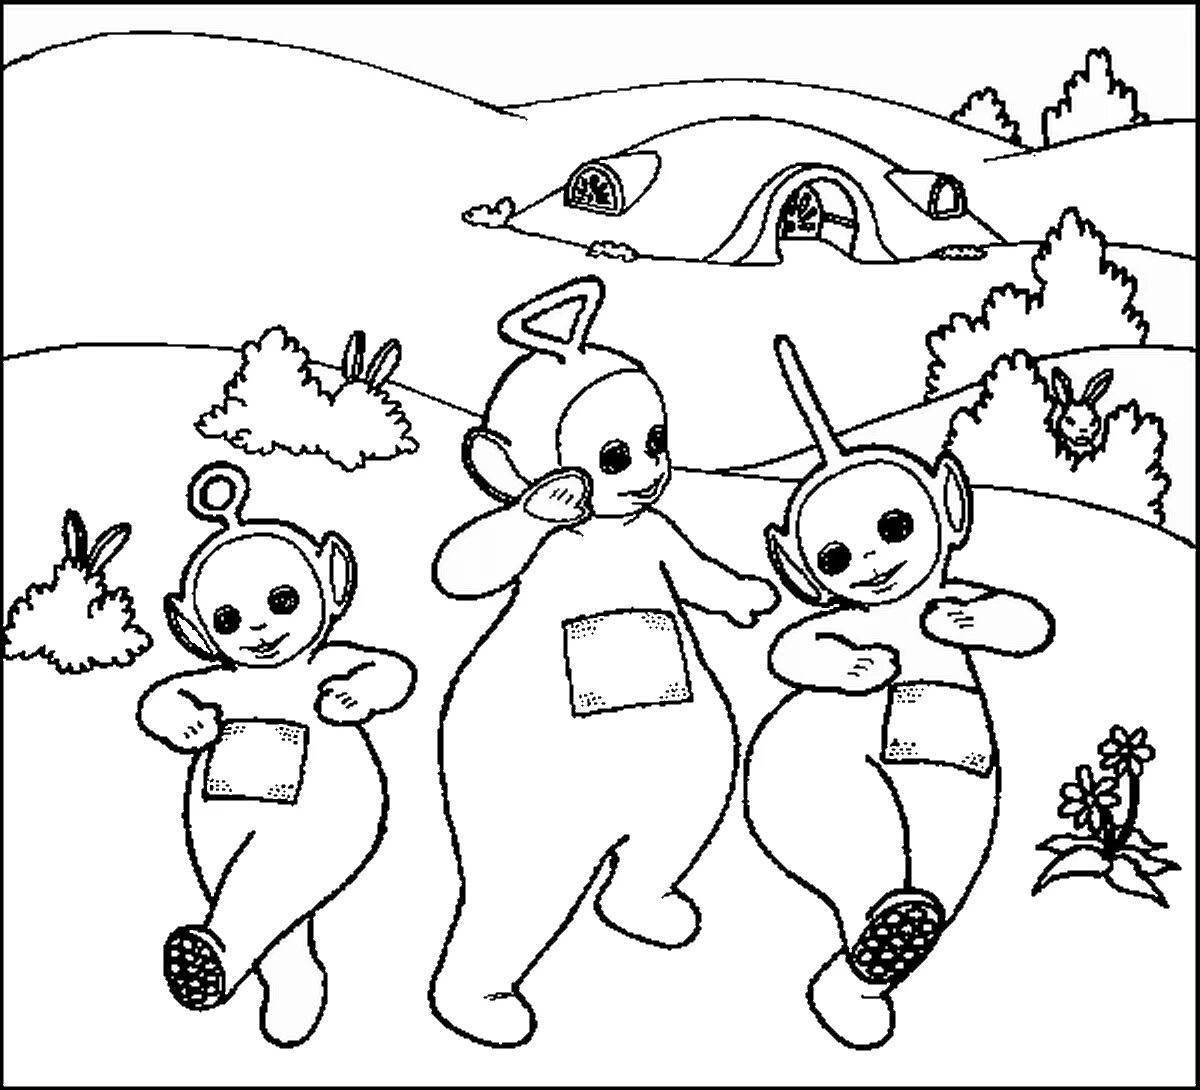 Exciting coloring slender-tubbies